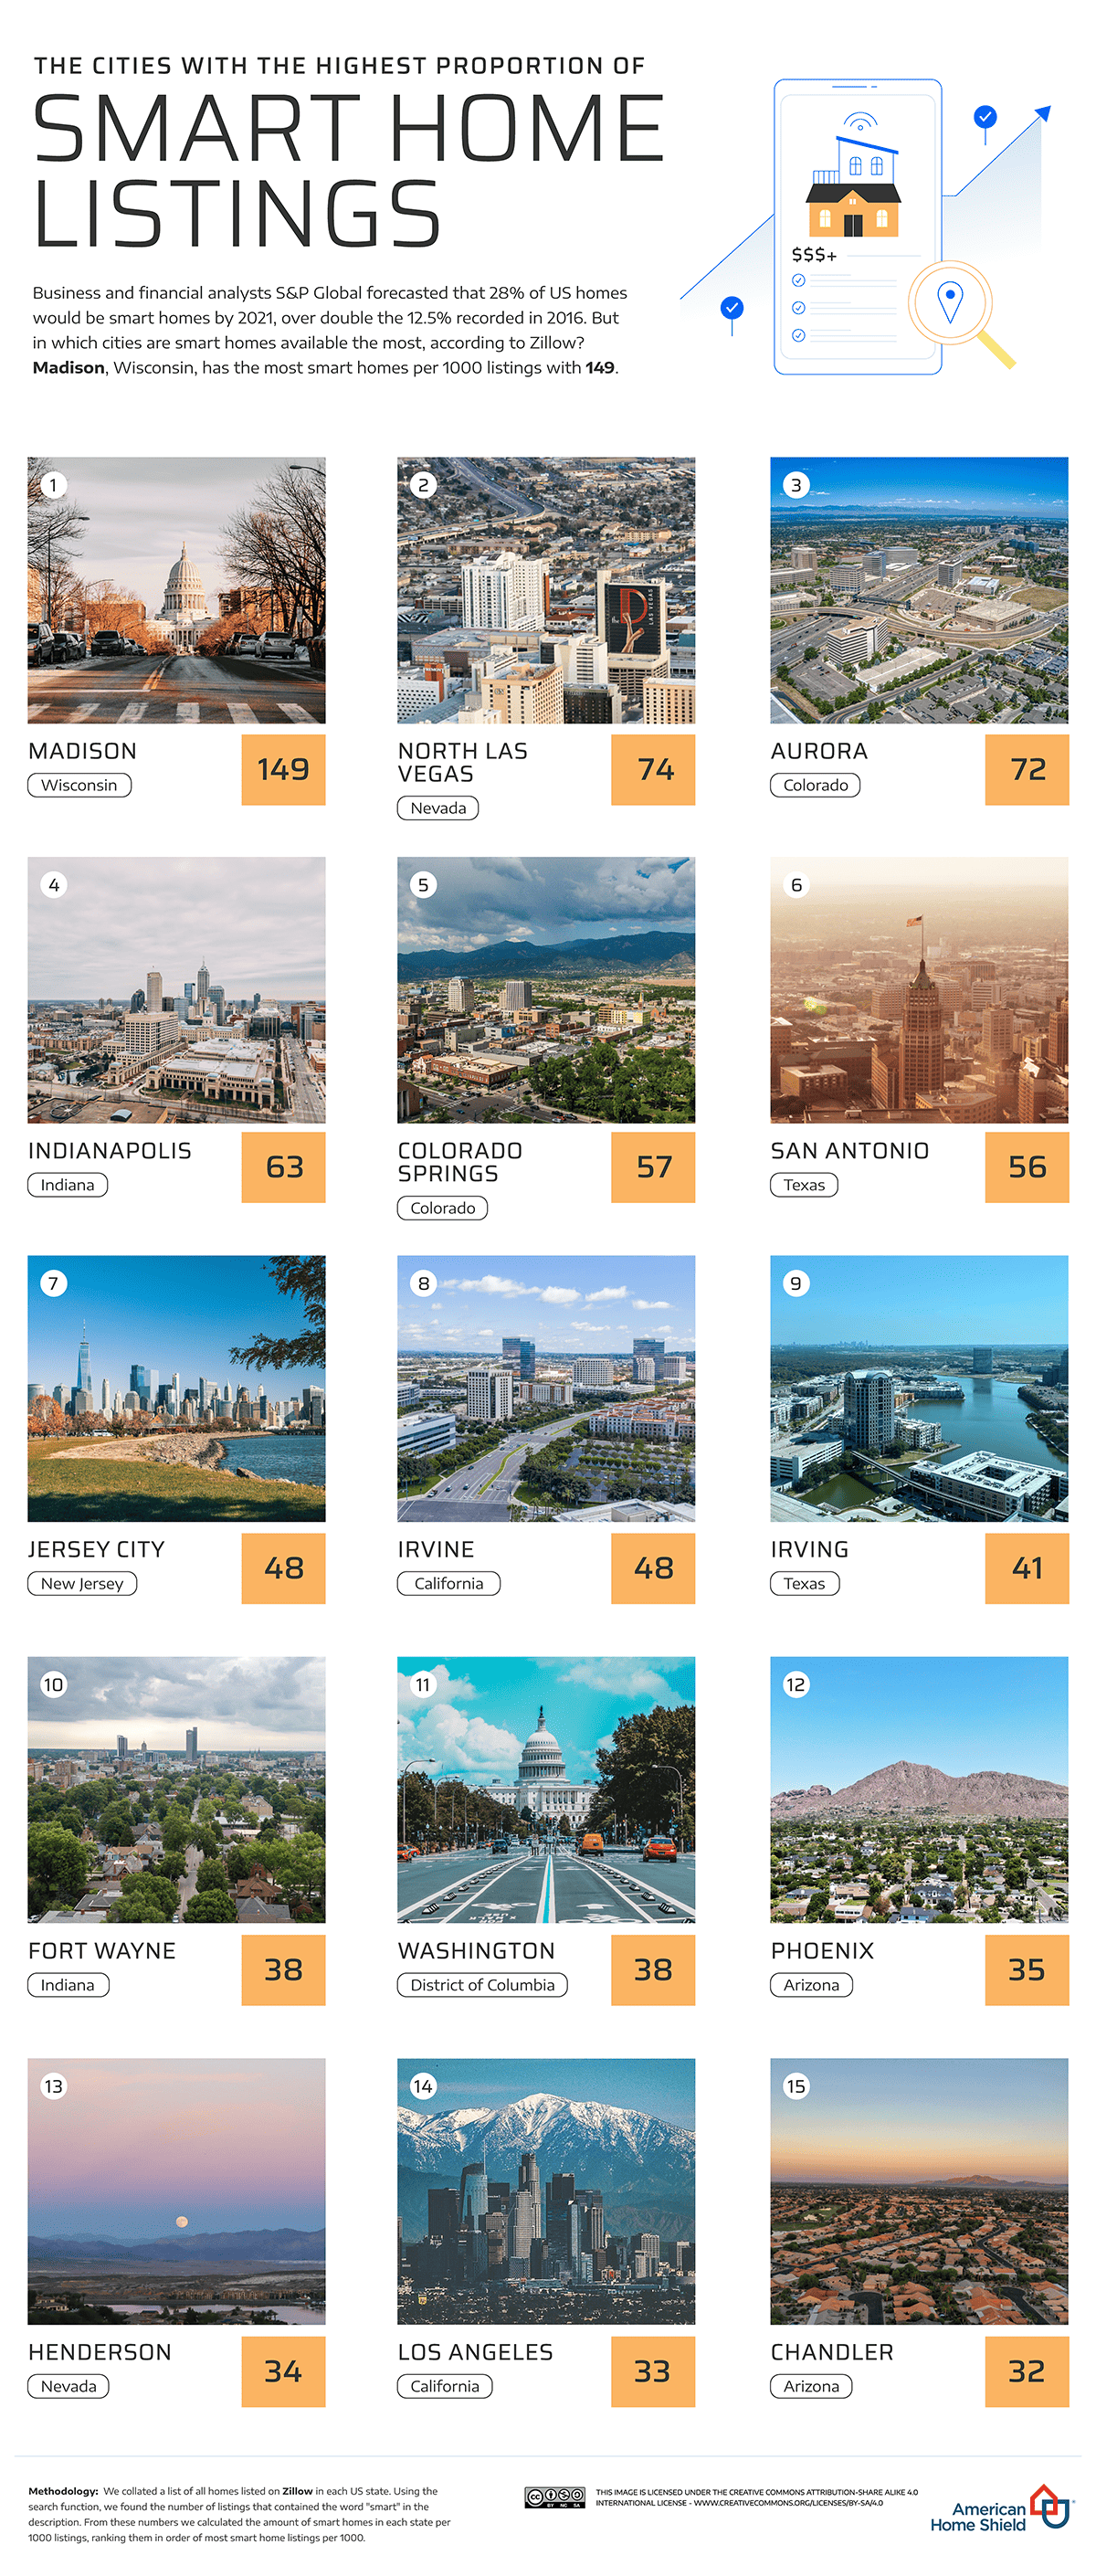 Top 15 US Cities With the Most Smart Home Listings Per 1K